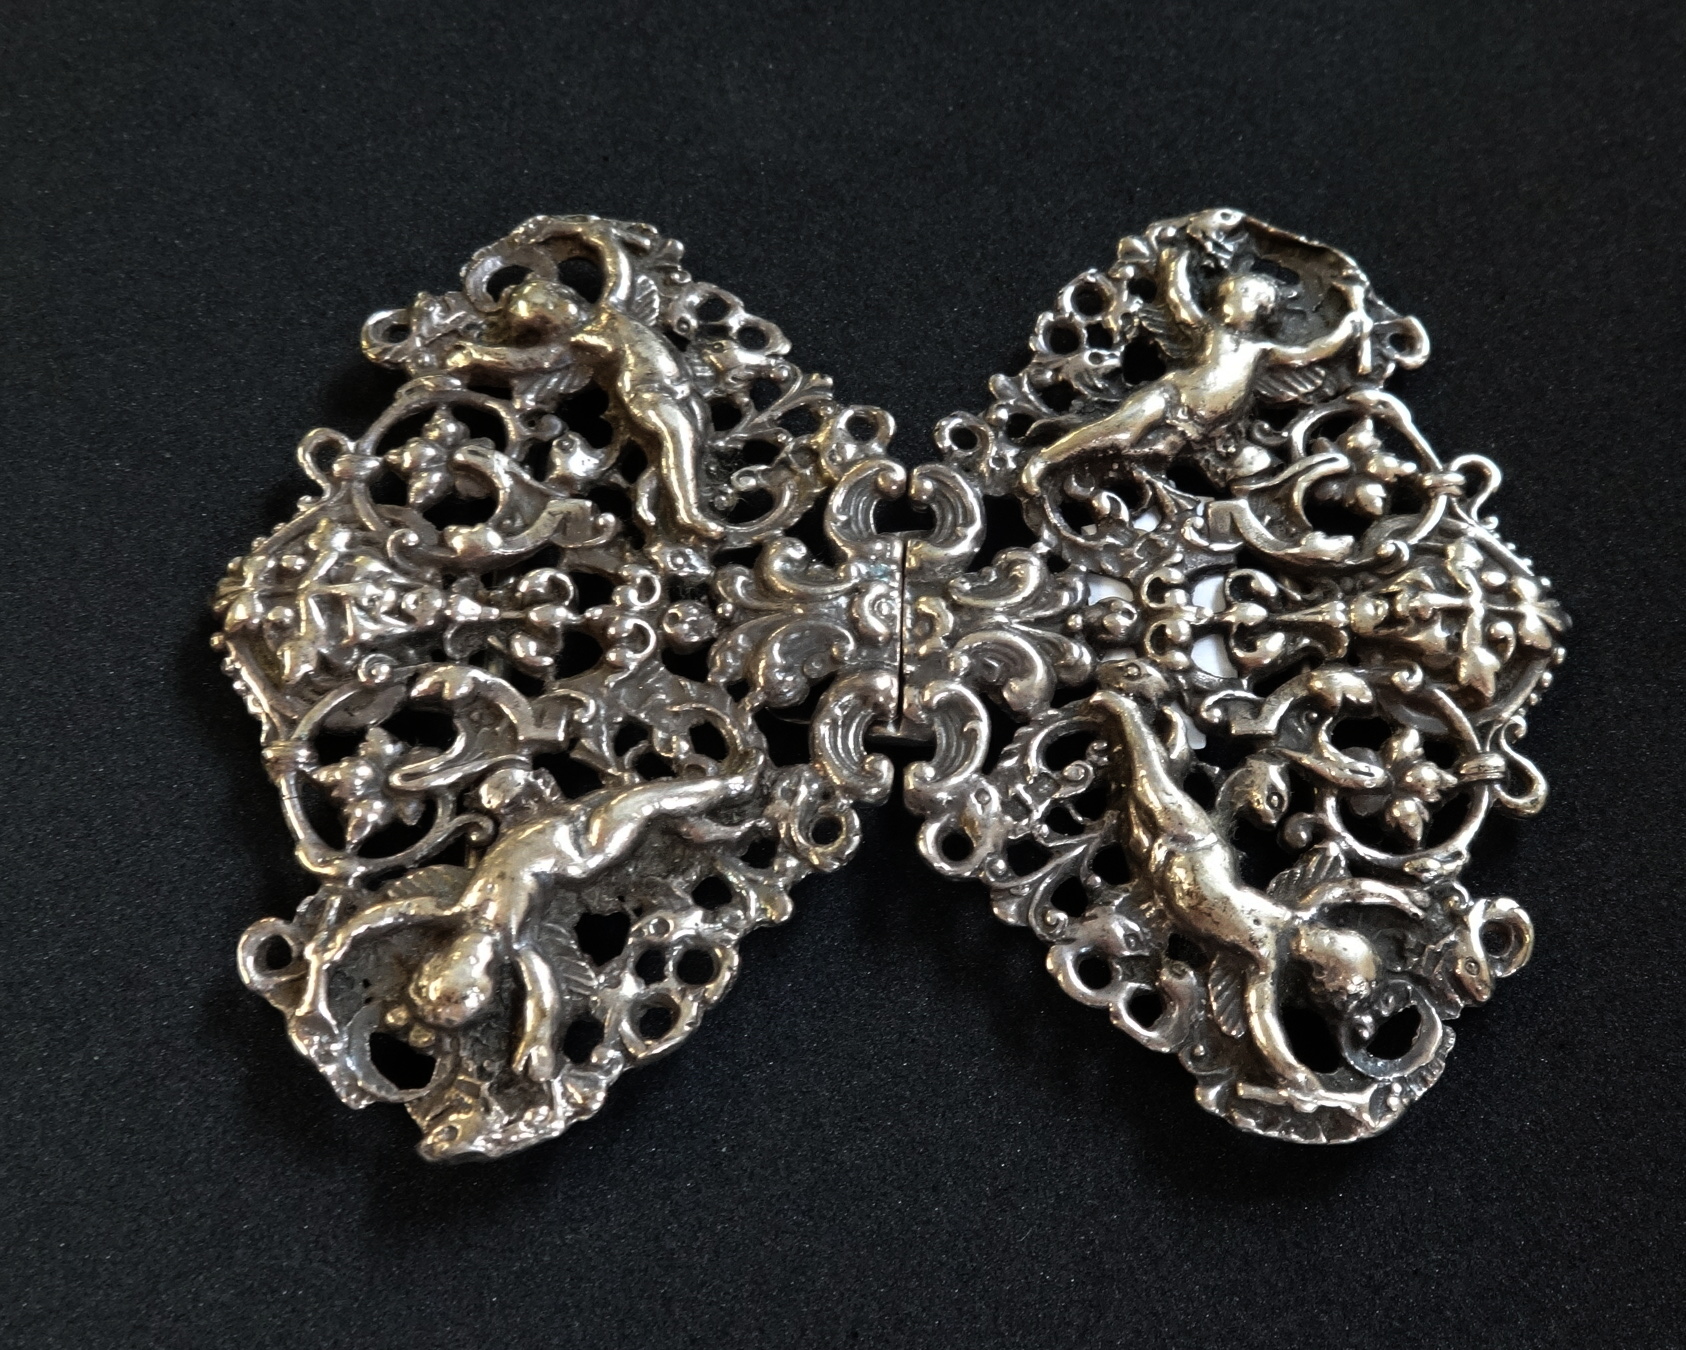 An ornate silver nurses buckle decorated with cherubs.